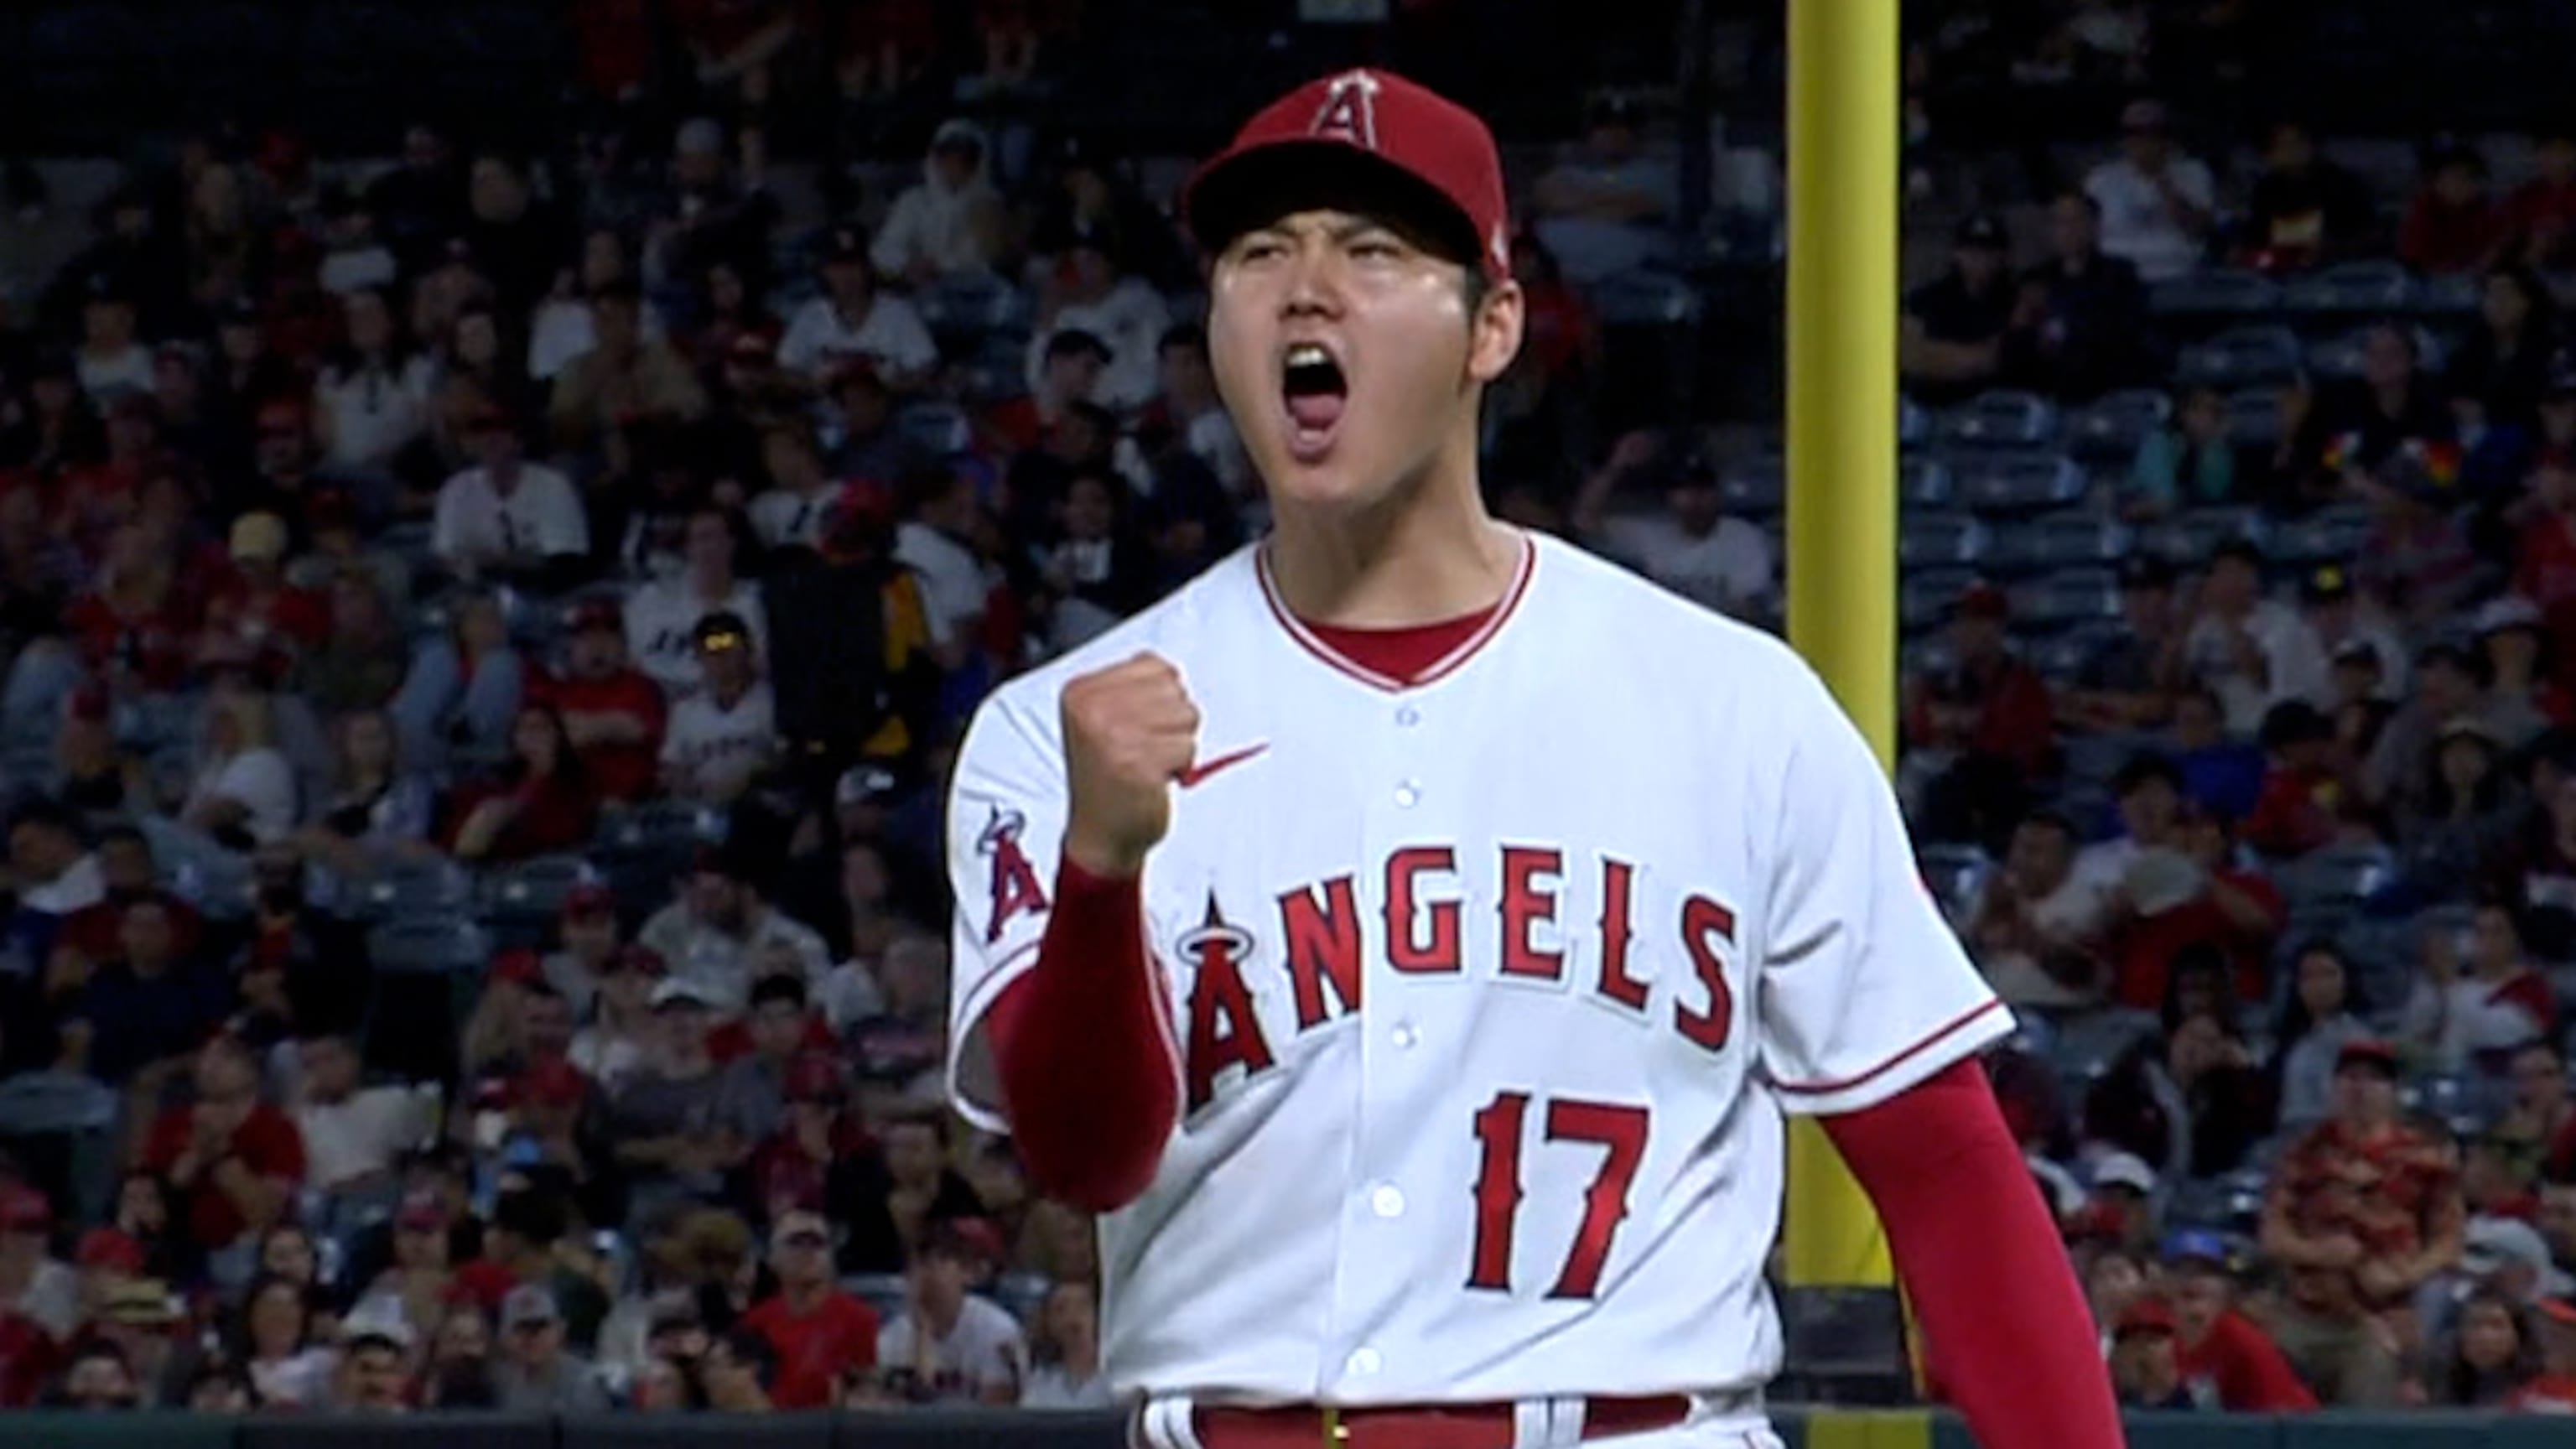 MLB Game Preview: Your plans tonight are set - Watch Shohei Ohtani against  the Pirates - Bucs Dugout